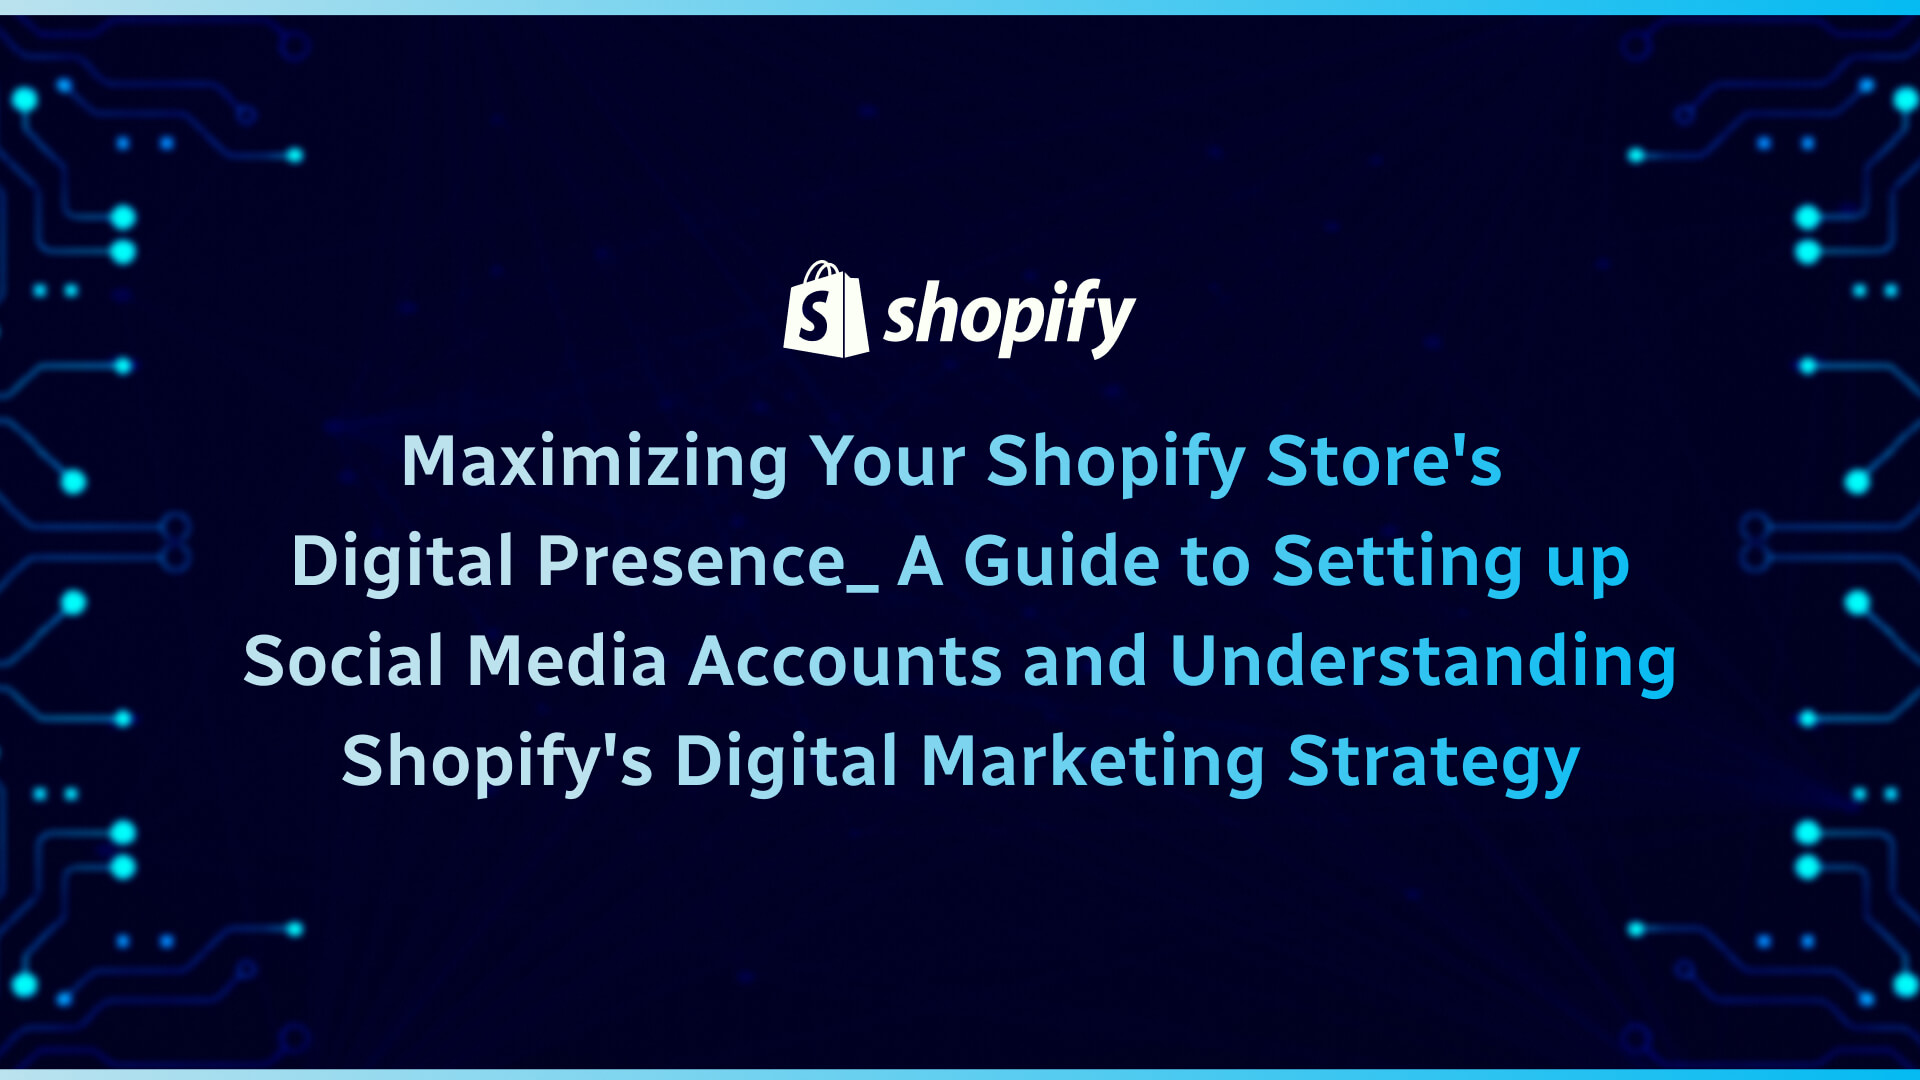 Maximizing Your Shopify Store’s Digital Presence: A Guide to Setting up Social Media Accounts and Understanding Shopify’s Digital Marketing Strategy